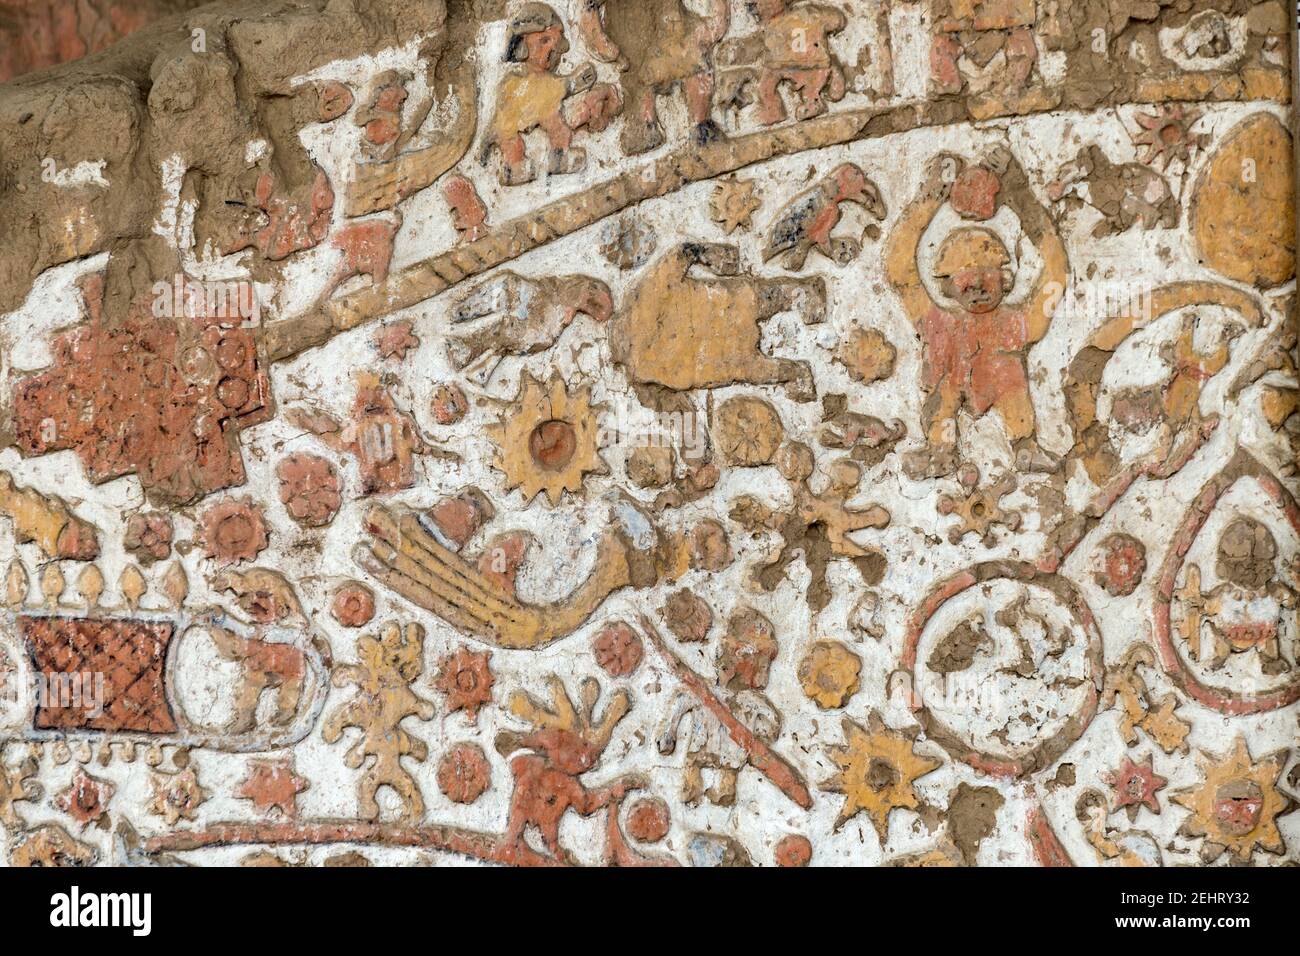 Vulture eating decapitated body + other images, Mural of The Myths, Temple of the Moon, Huaca del Luna, Moche people (Mochica), Trujillo, Peru Stock Photo